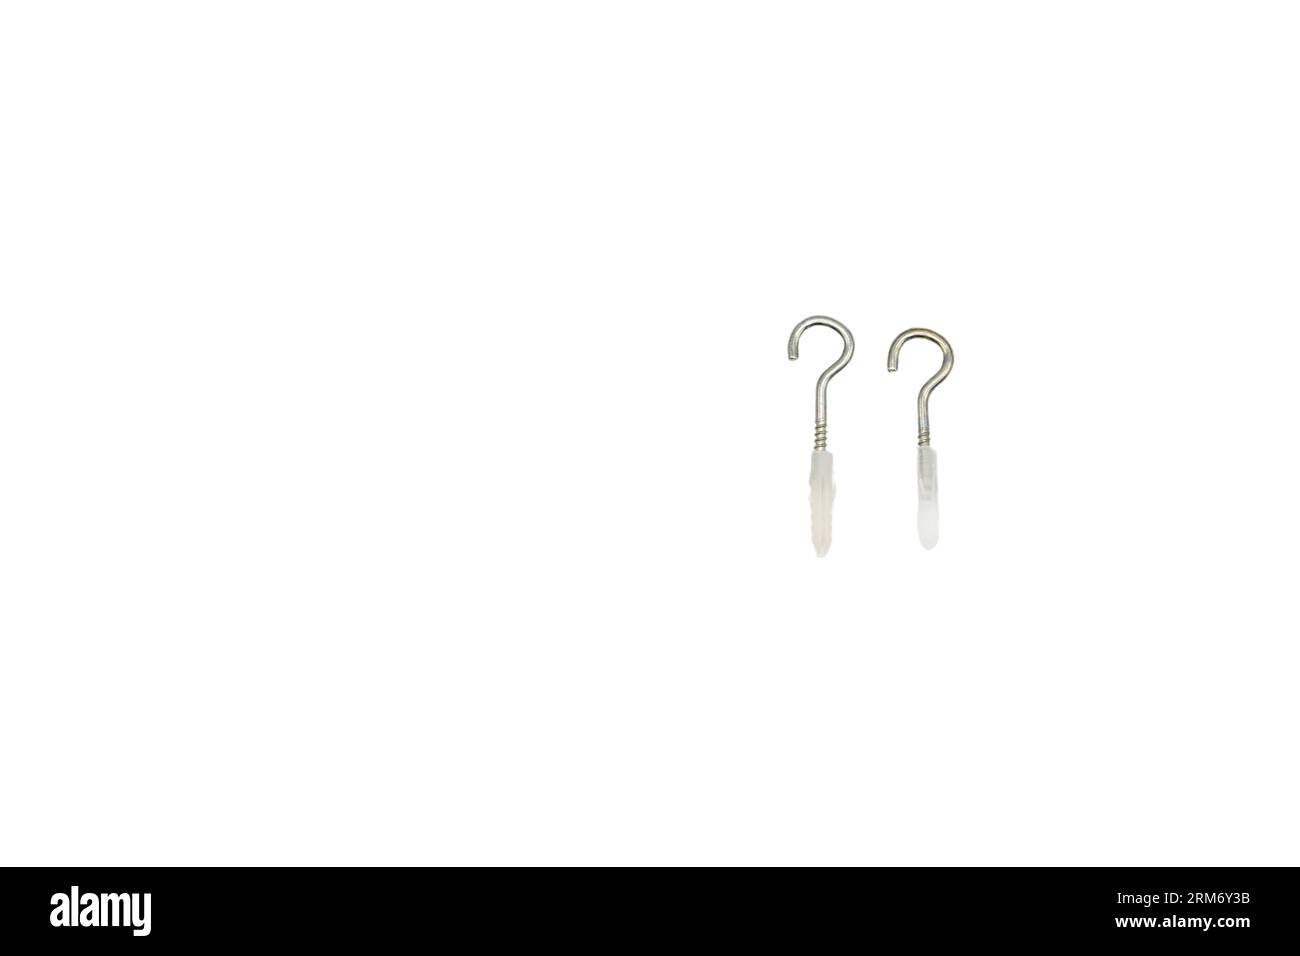 Question mark hook screws isolated on a white background Stock Photo